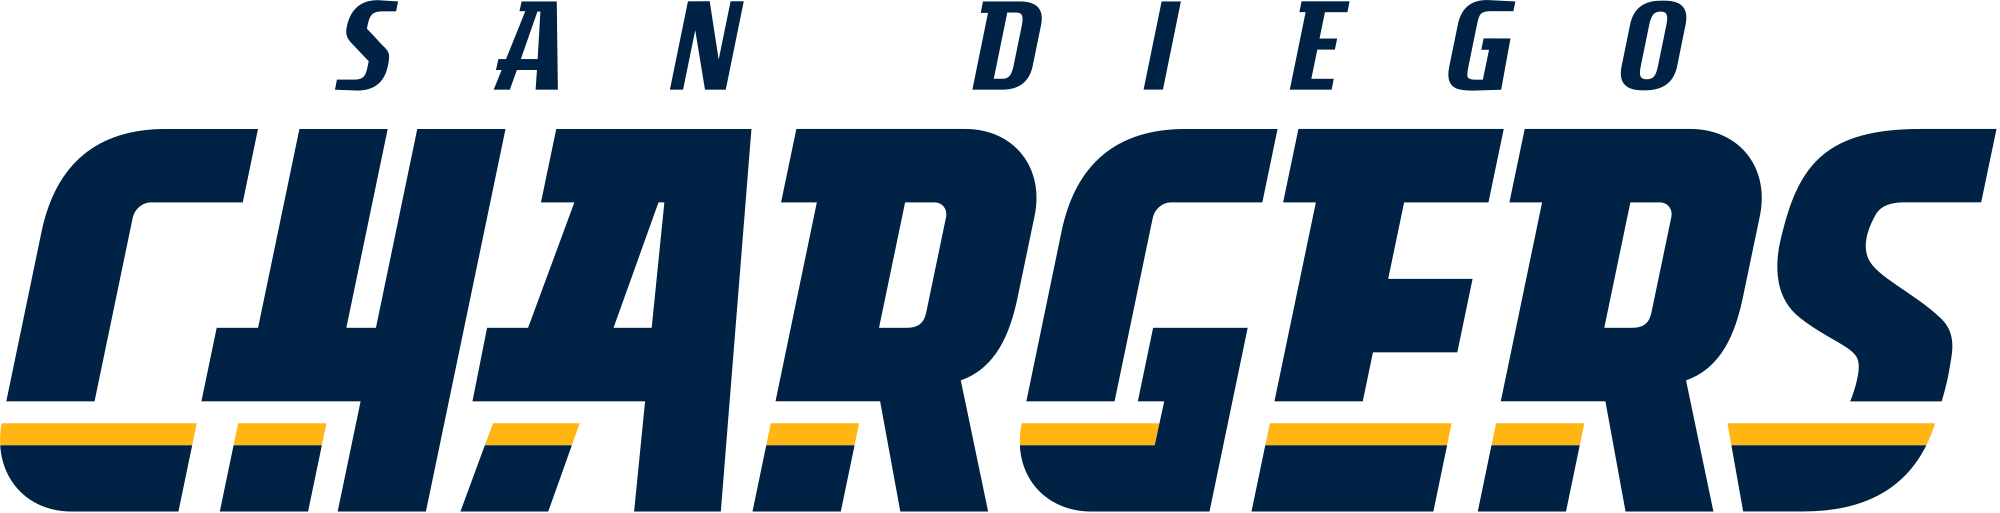 Open - Los Angeles Chargers (2000x513), Png Download